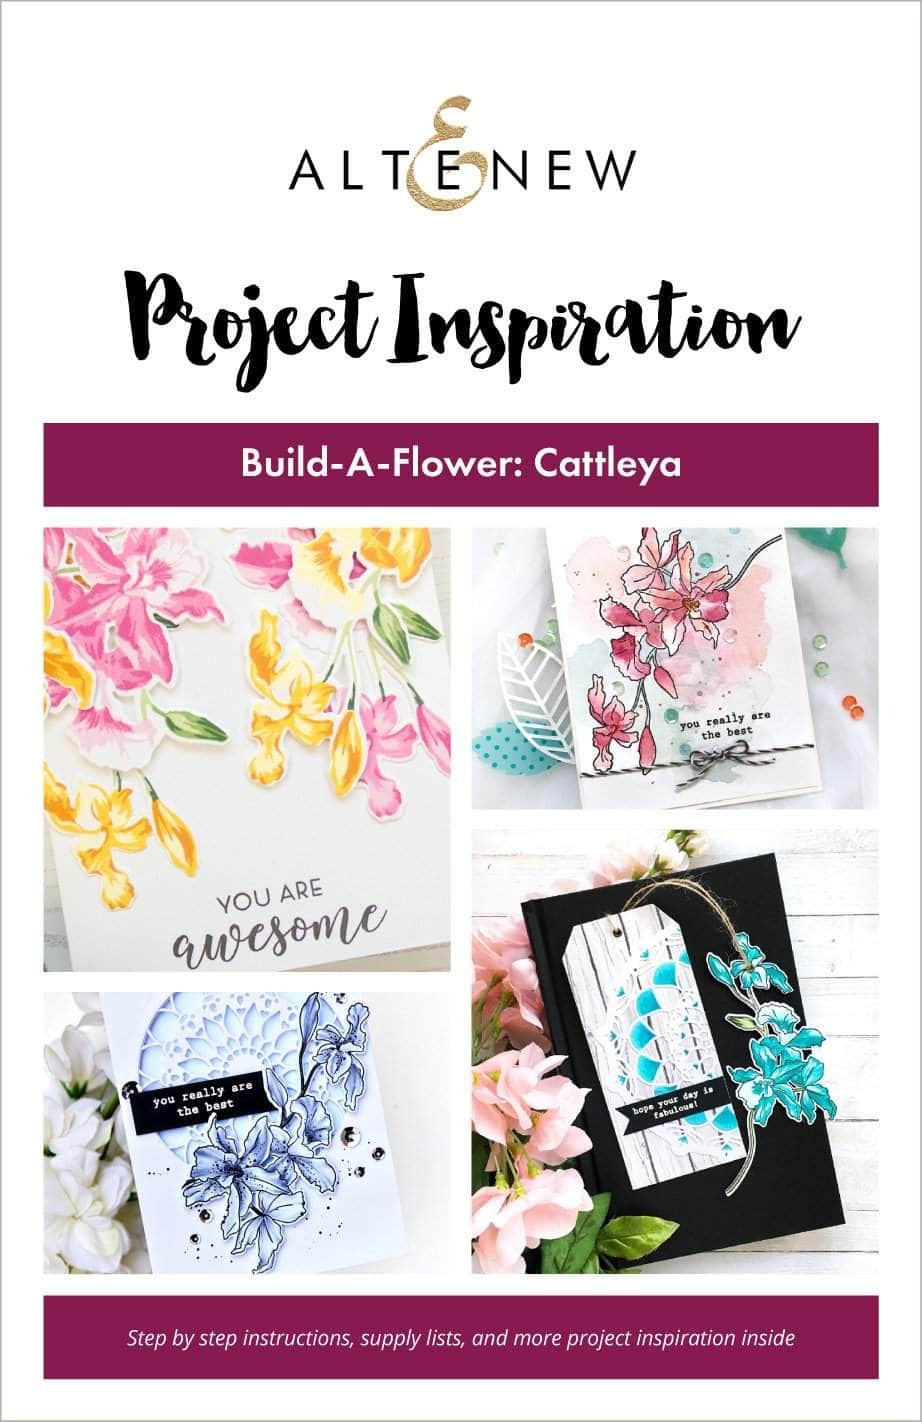 Printed Media Build-A-Flower: Cattleya Project Inspiration Guide